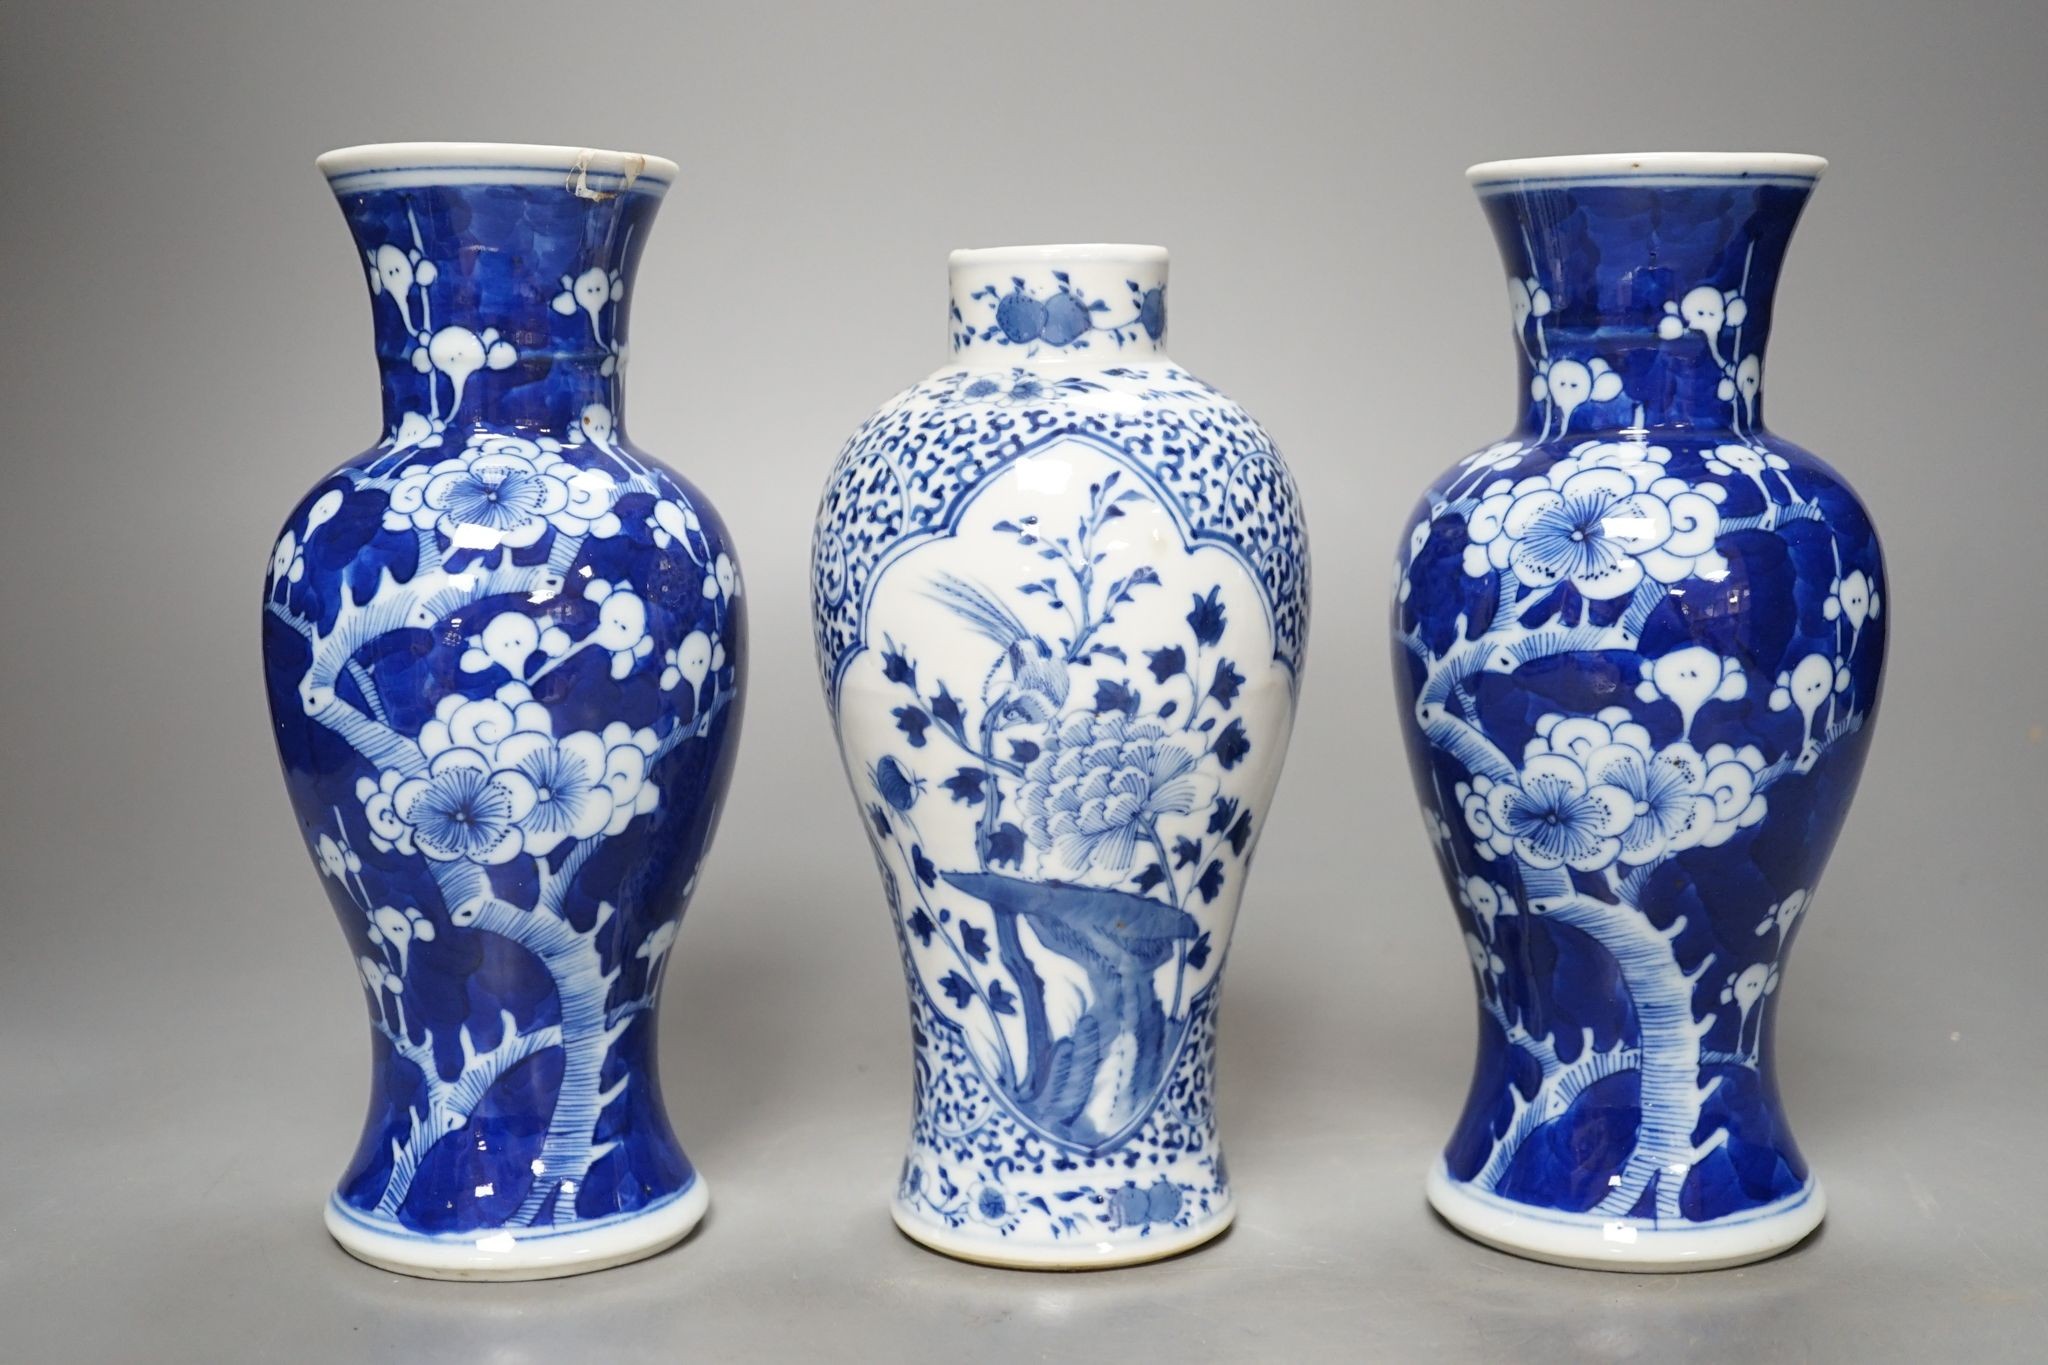 Three Chinese blue and white vases, late 19th/early 20th century, the tallest 19.5 cm